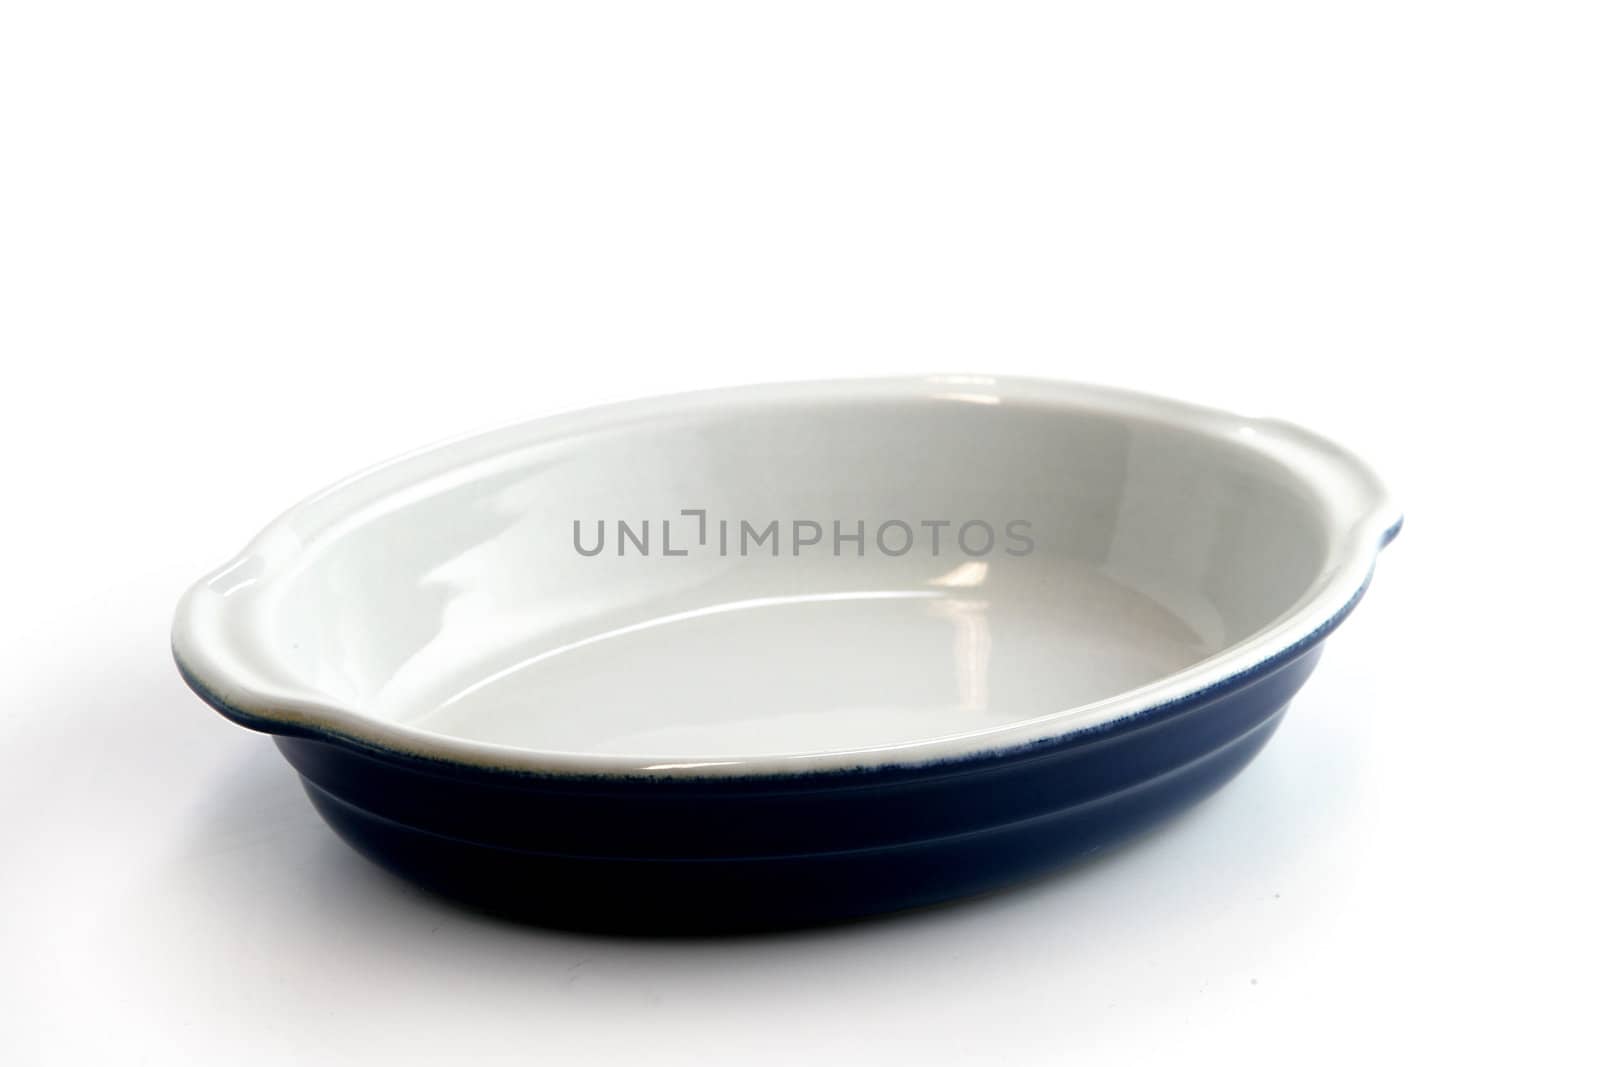 Empty baking dish by phovoir